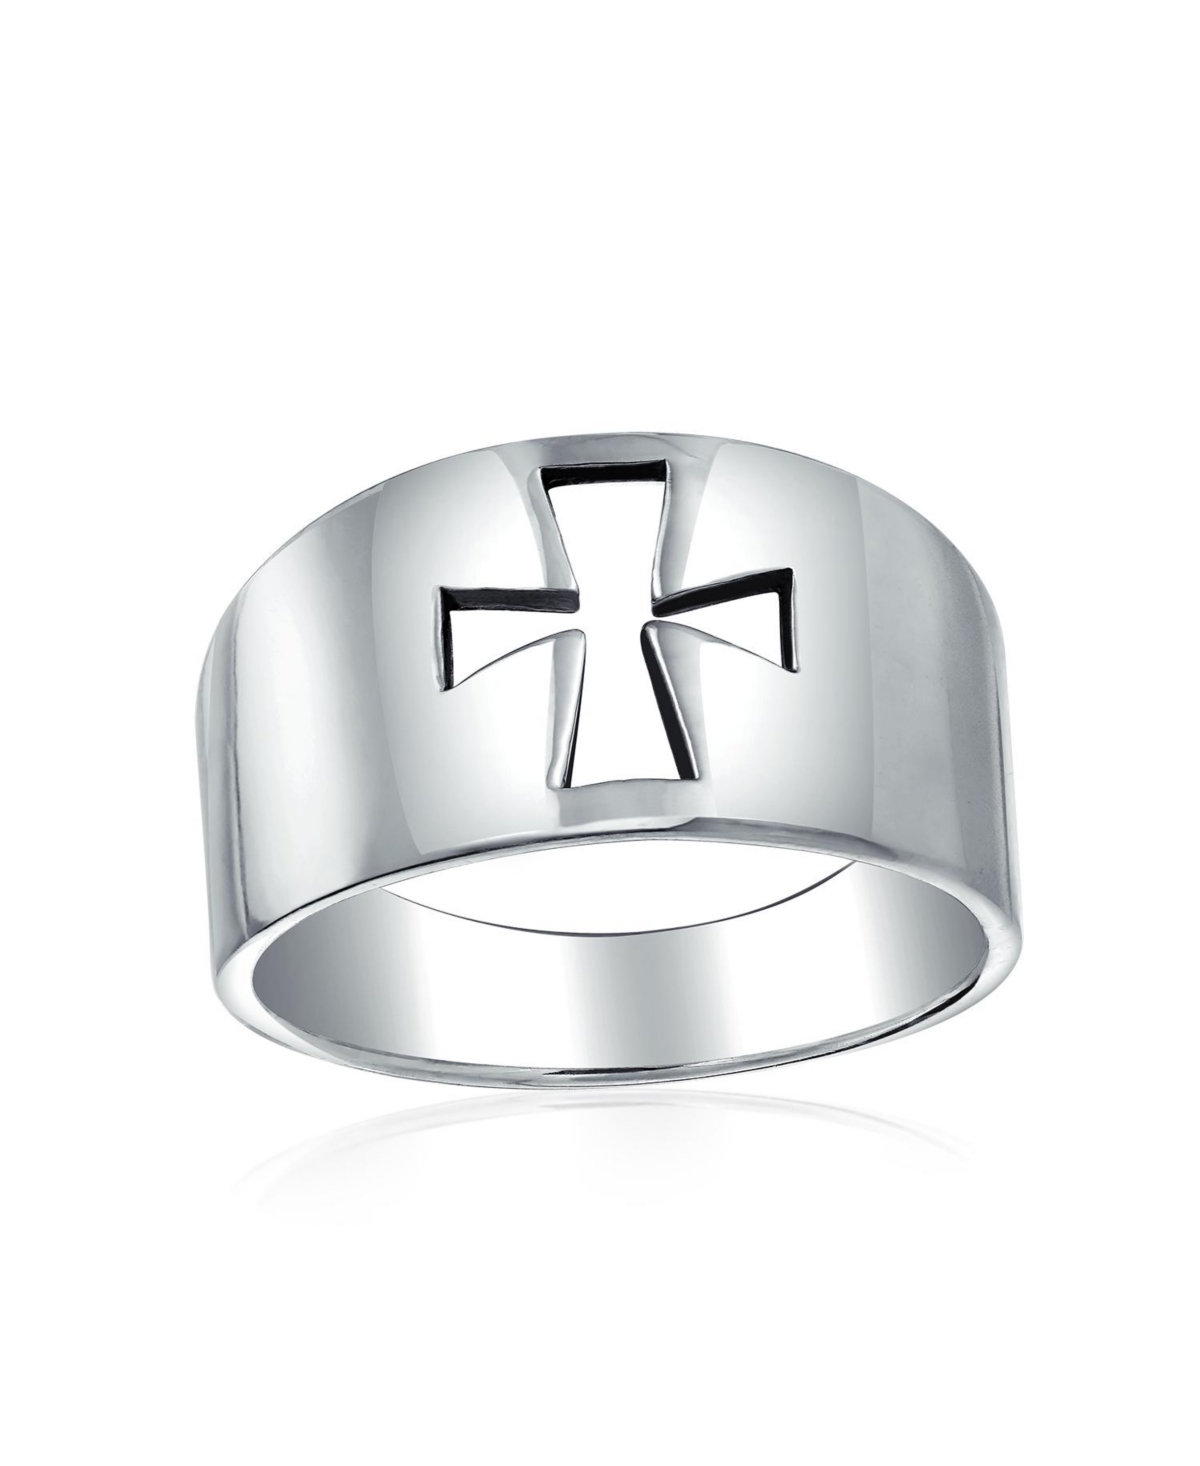 Simple Religious Saint John Christian Wide Cut-out Cross Signet Ring For Women Men .925 Sterling Silver Shinny Polished - Silver